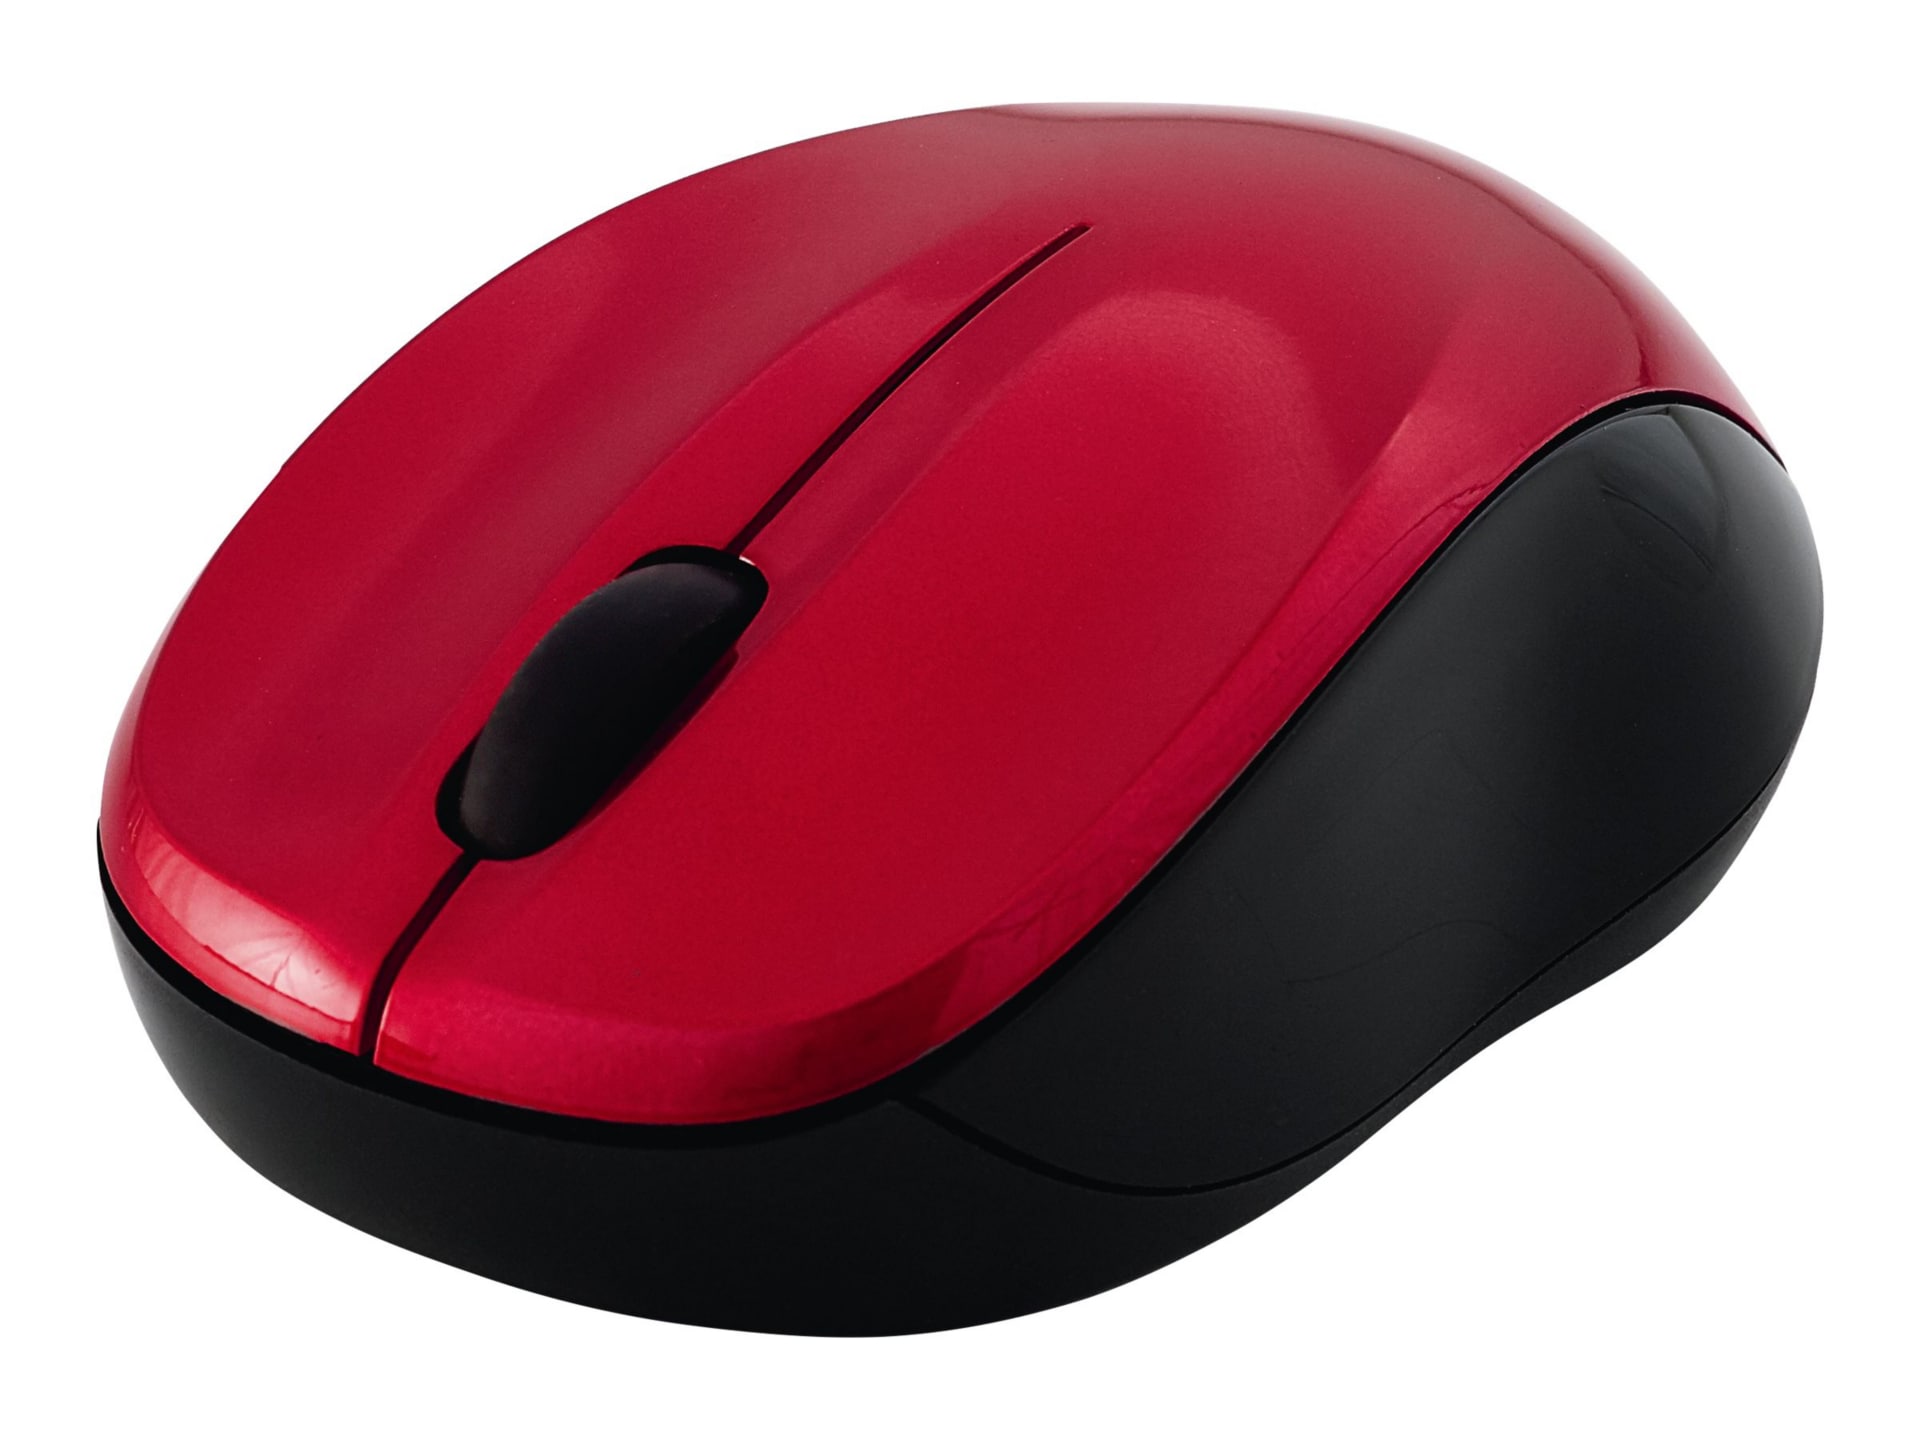 Verbatim Silent Wireless Blue LED Mouse - mouse - 2.4 GHz - red - 99780